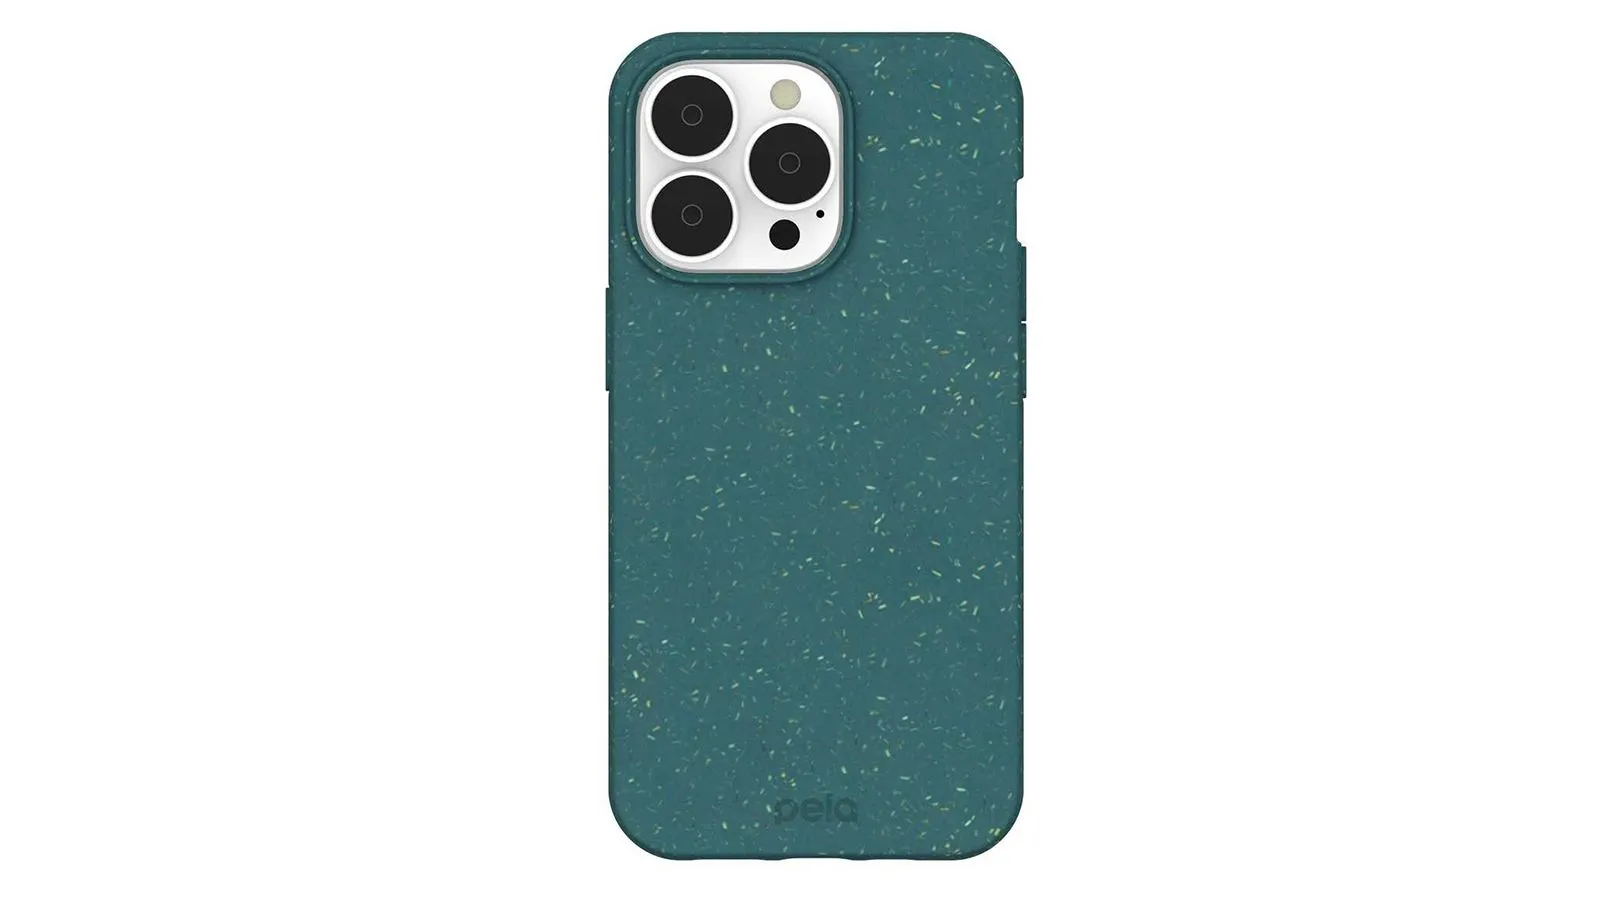 Eco-friendly phone cases come with style and sustainability